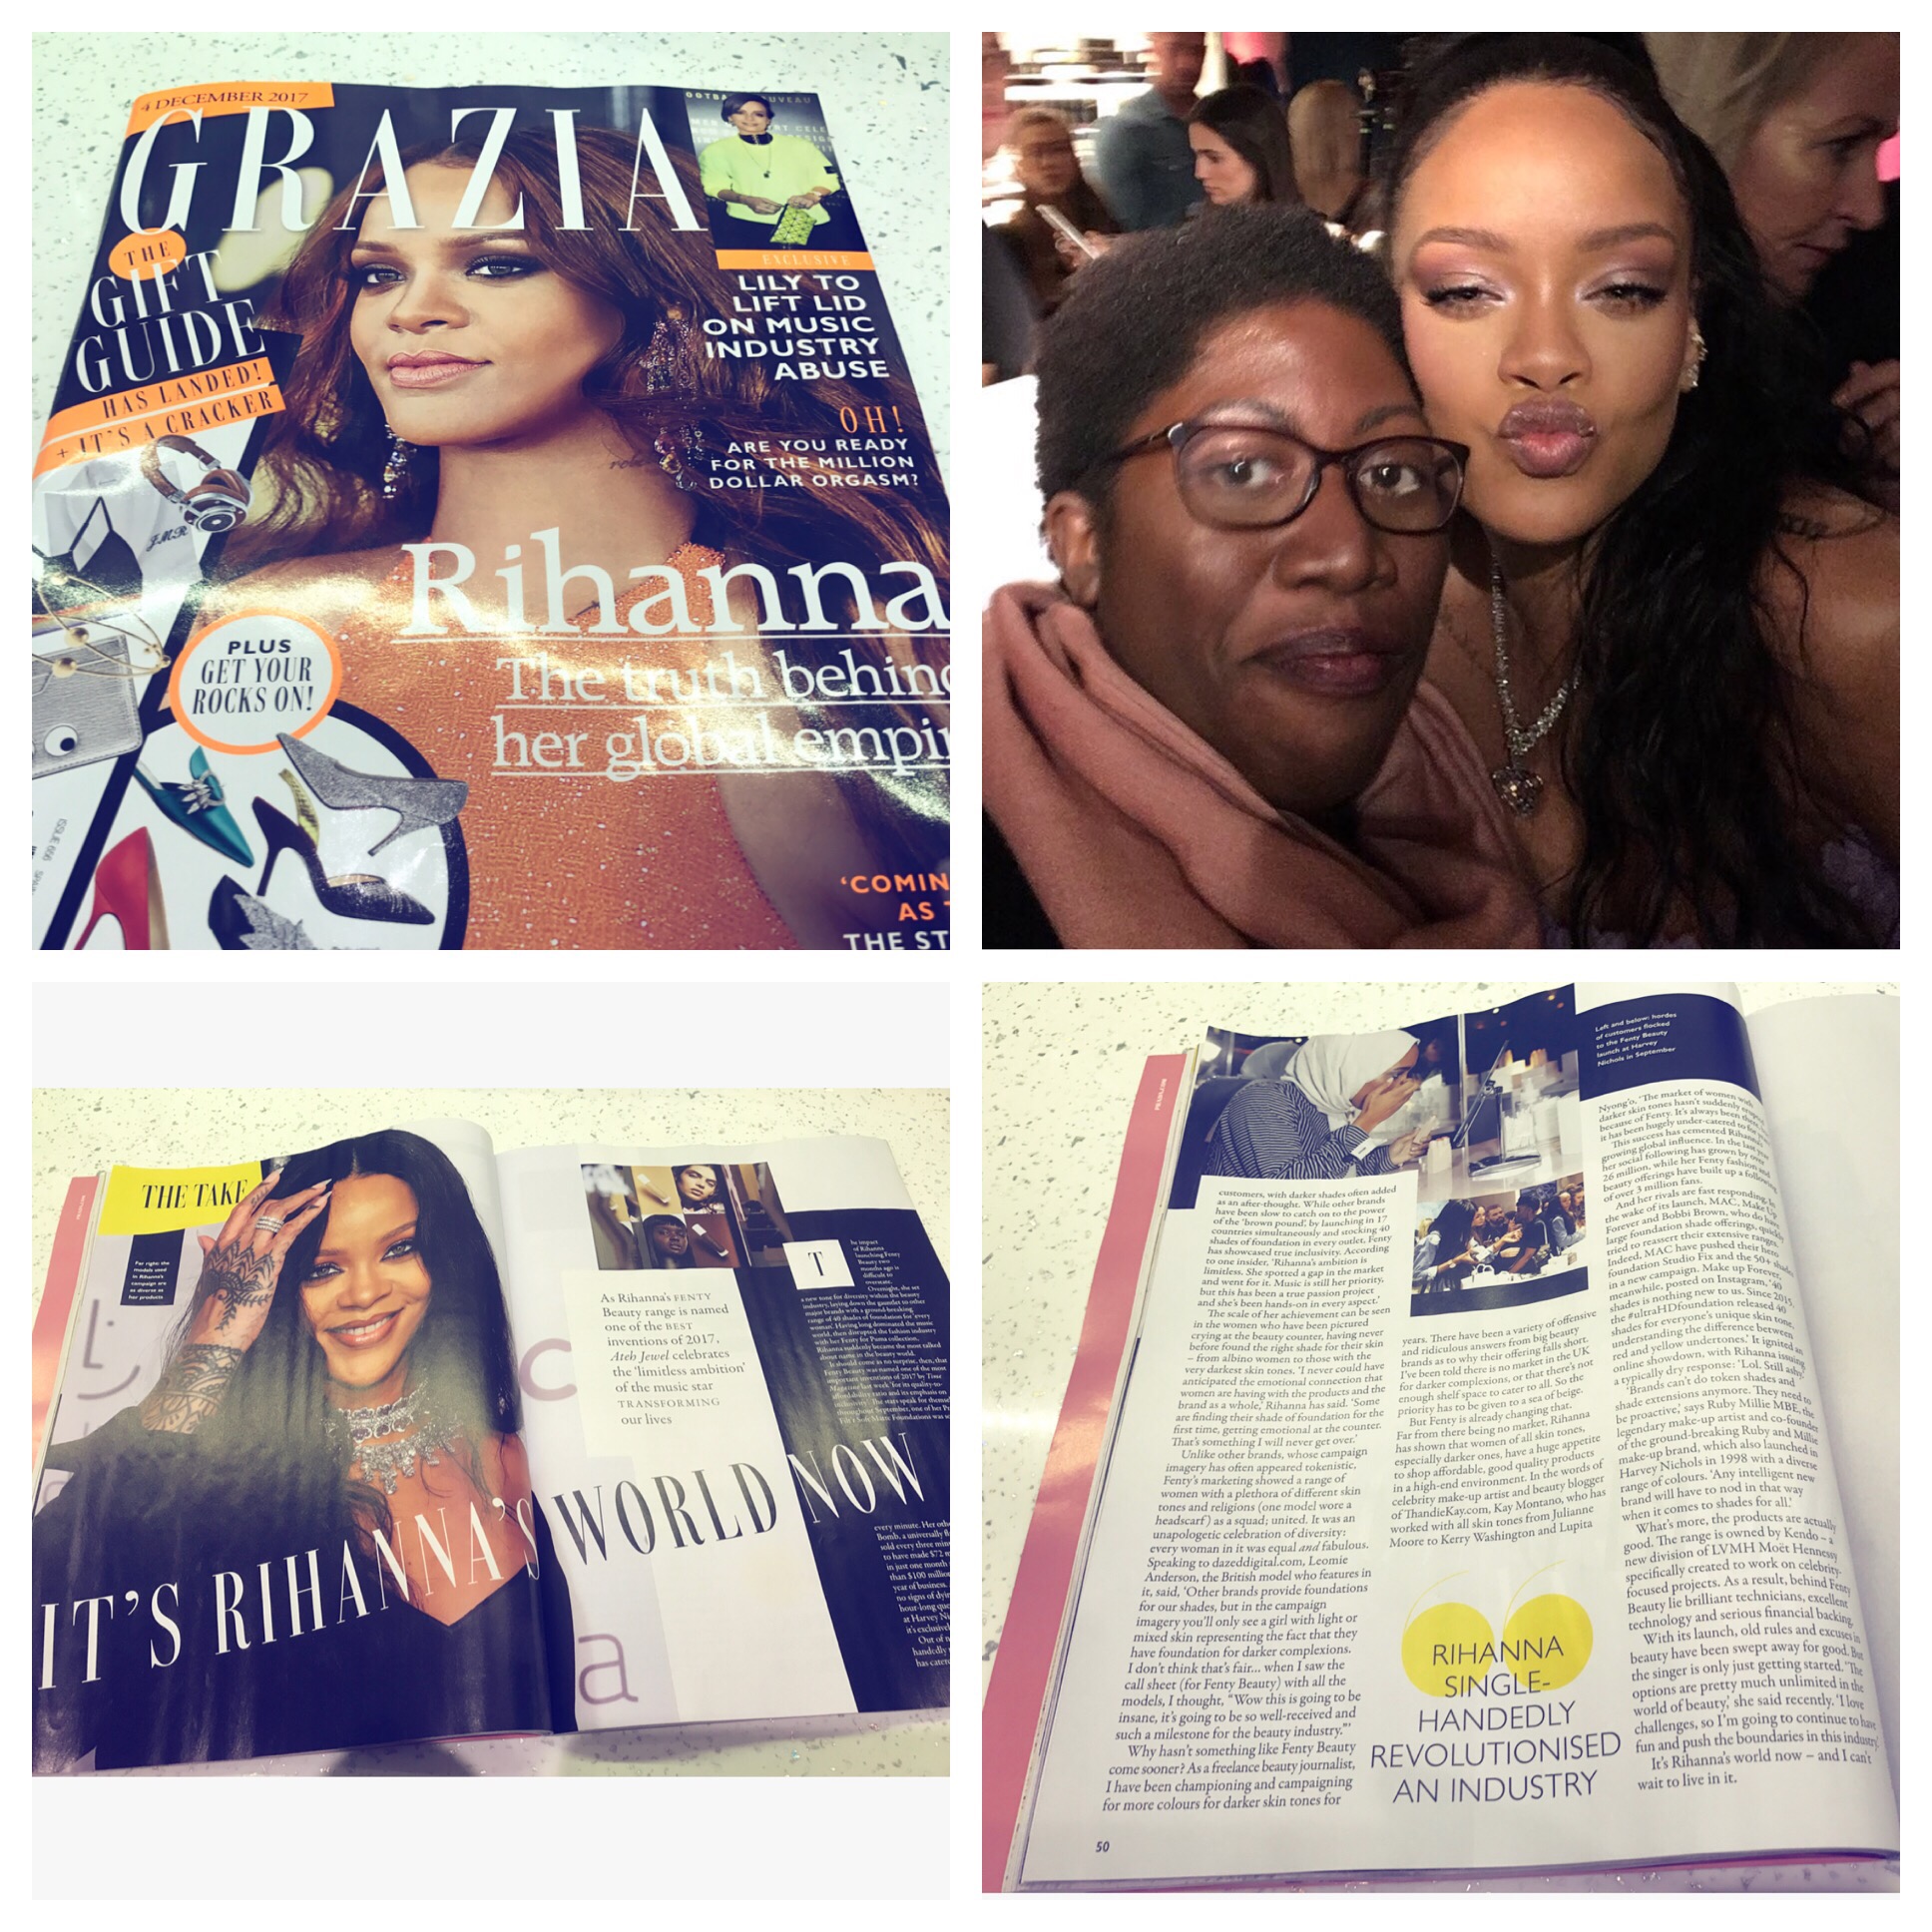 MY GRAZIA COVER STORY ON THE RISE OF FENTY BEAUTY